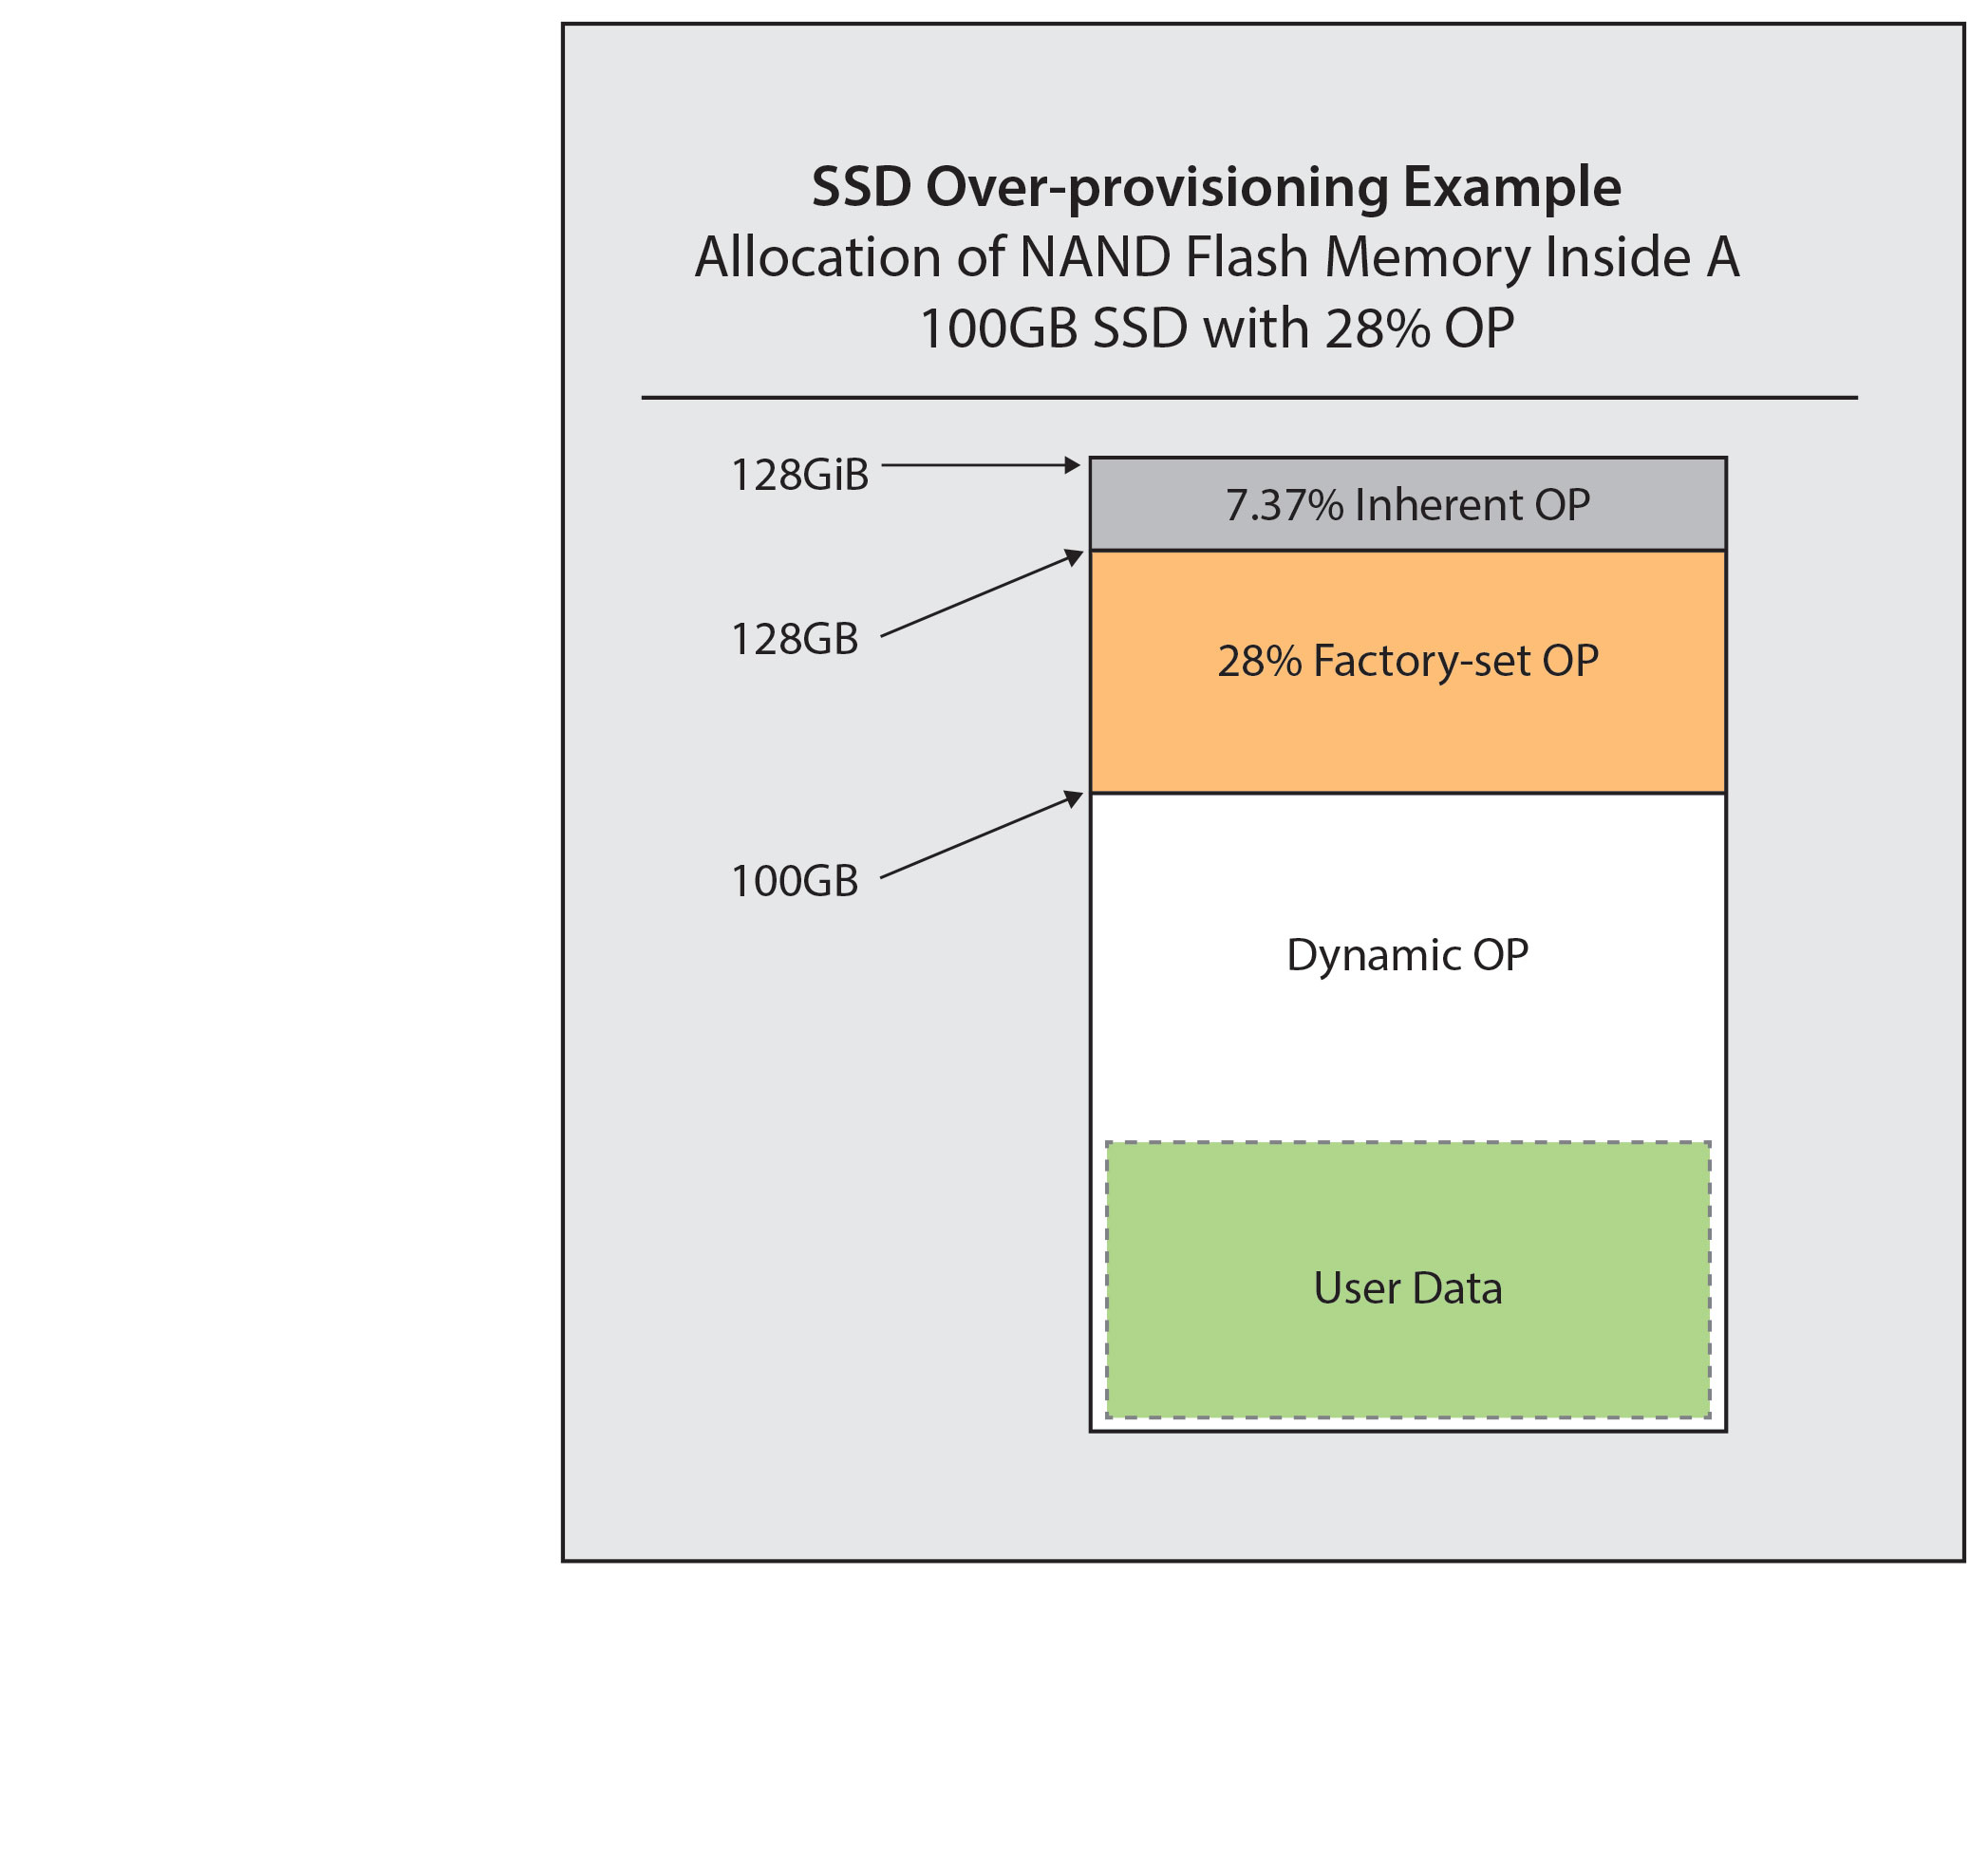 ssd-over-provisioning-example-2094x1956.jpg